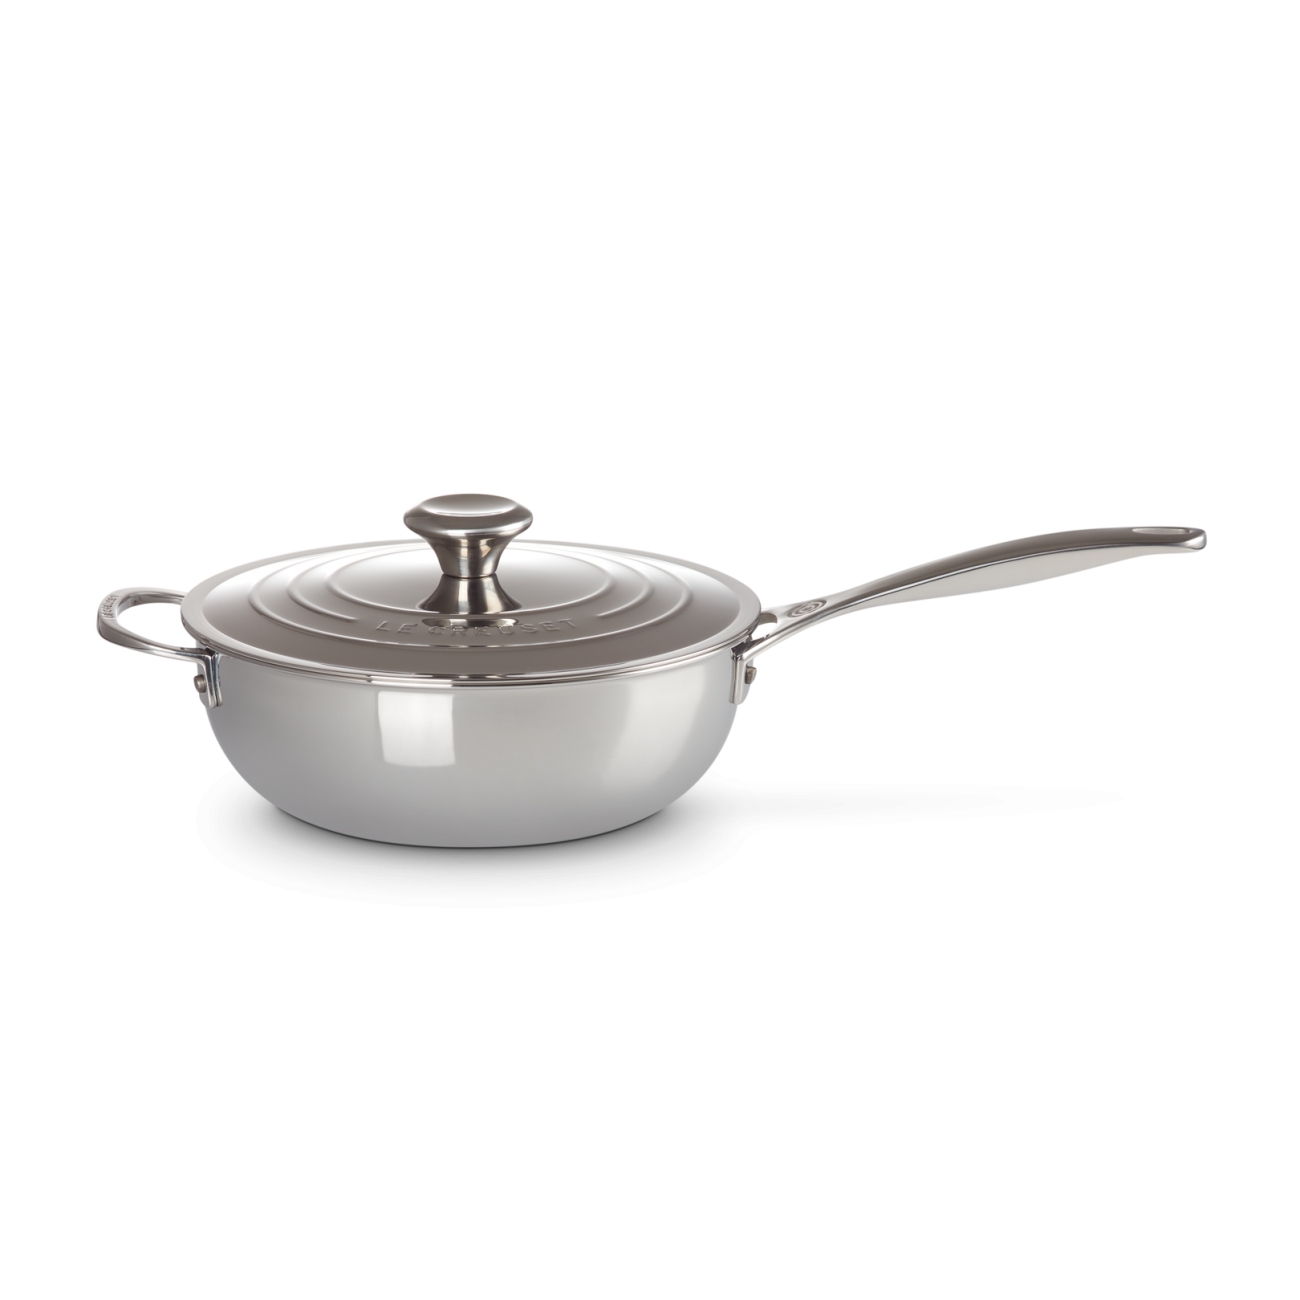 https://www.tattahome.com/53385-large_default/le-creuset-signature-stainless-steel-non-stick-chef-pan.jpg